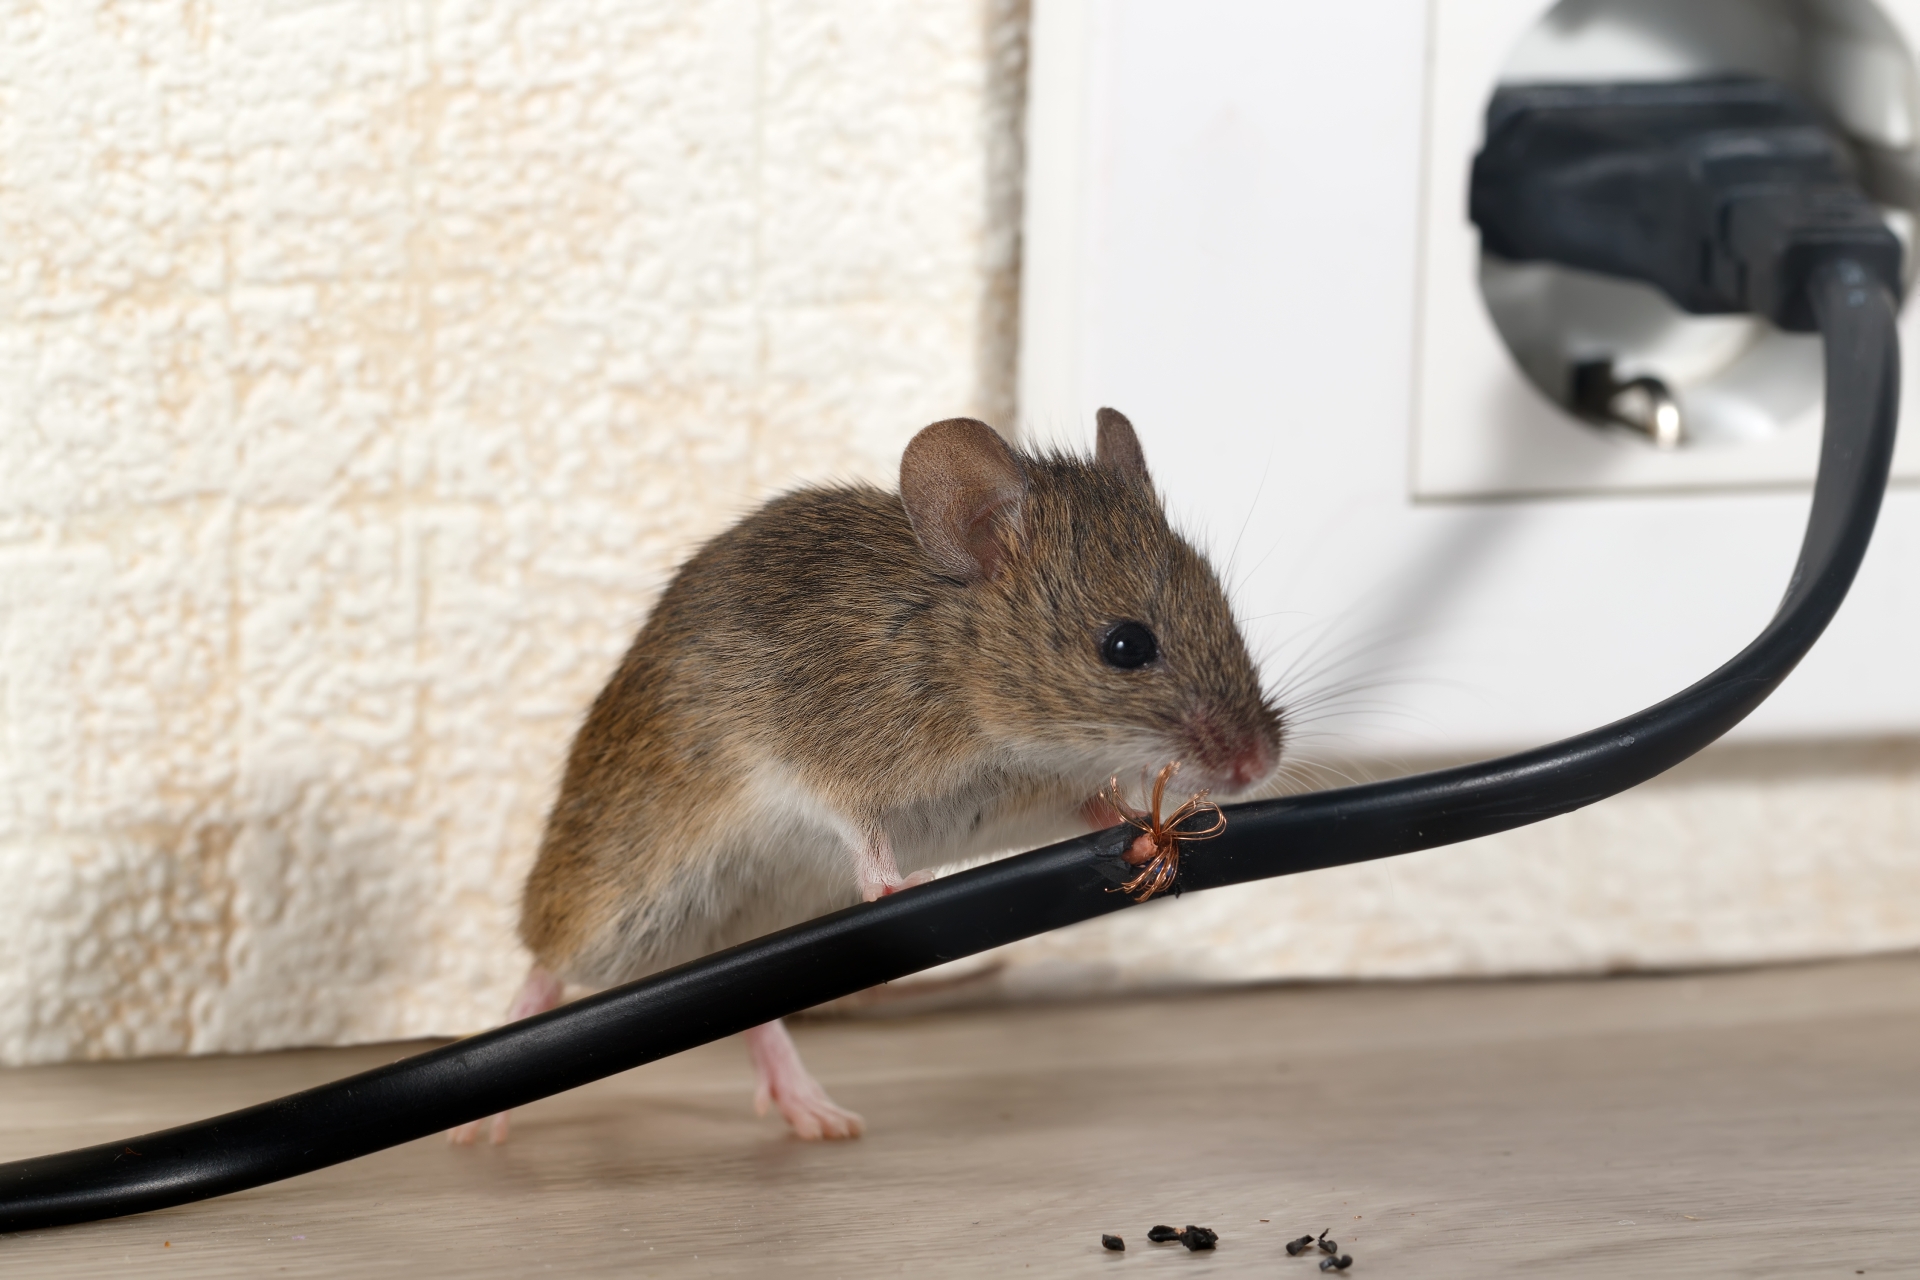 Mice Infestation, Pest Control in Orsett, Chafford Hundred, RM16. Call Now 020 8166 9746